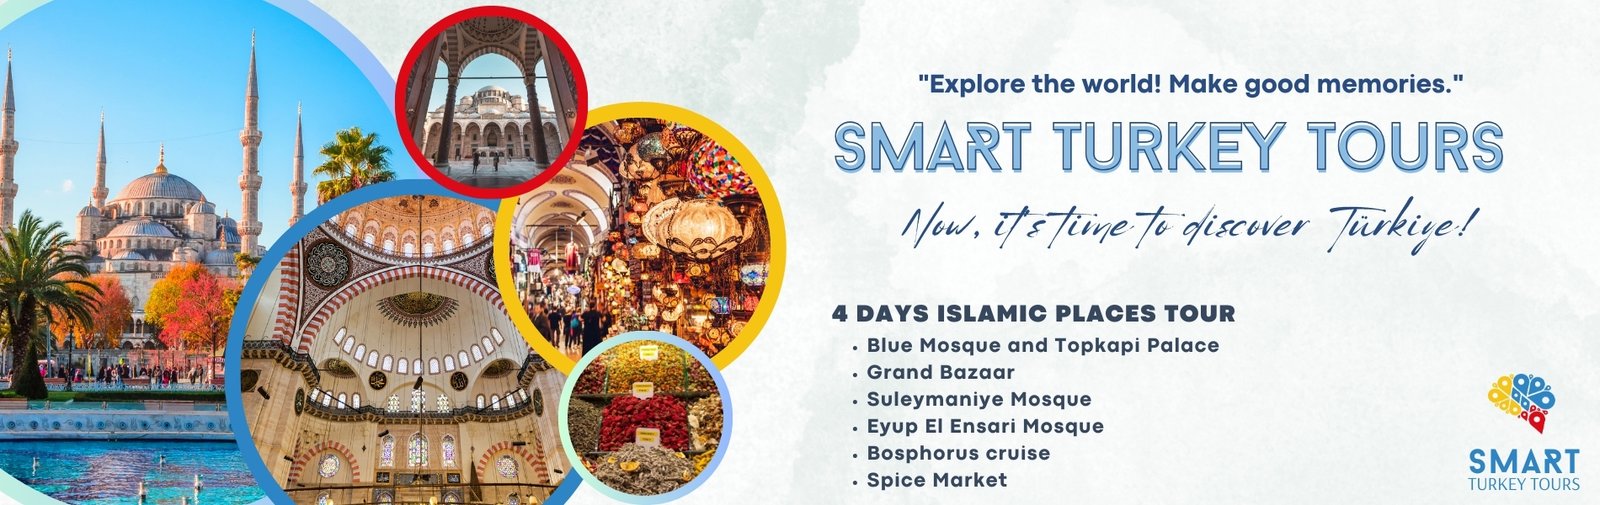 4 DAYS ISLAMIC RELICS TOUR IN ISTANBUL / Topkapi Palace, Blue Mosque, Eyup Sultan Tomb, Suleymaniye Mosque